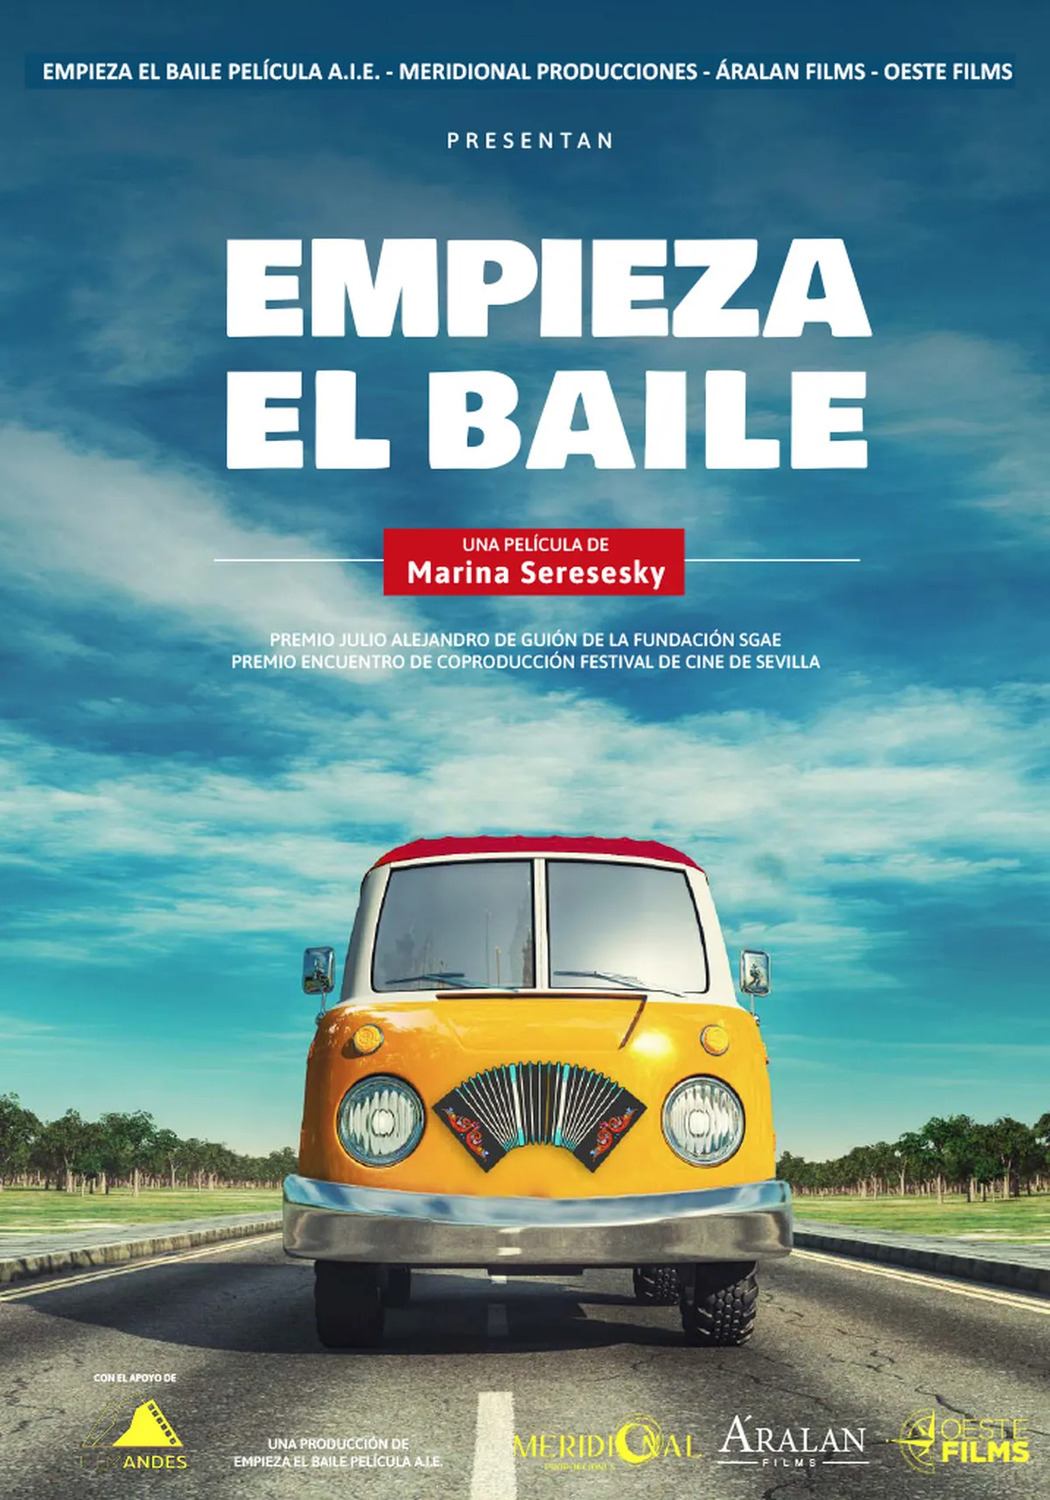 Extra Large Movie Poster Image for Empieza el baile (#1 of 3)